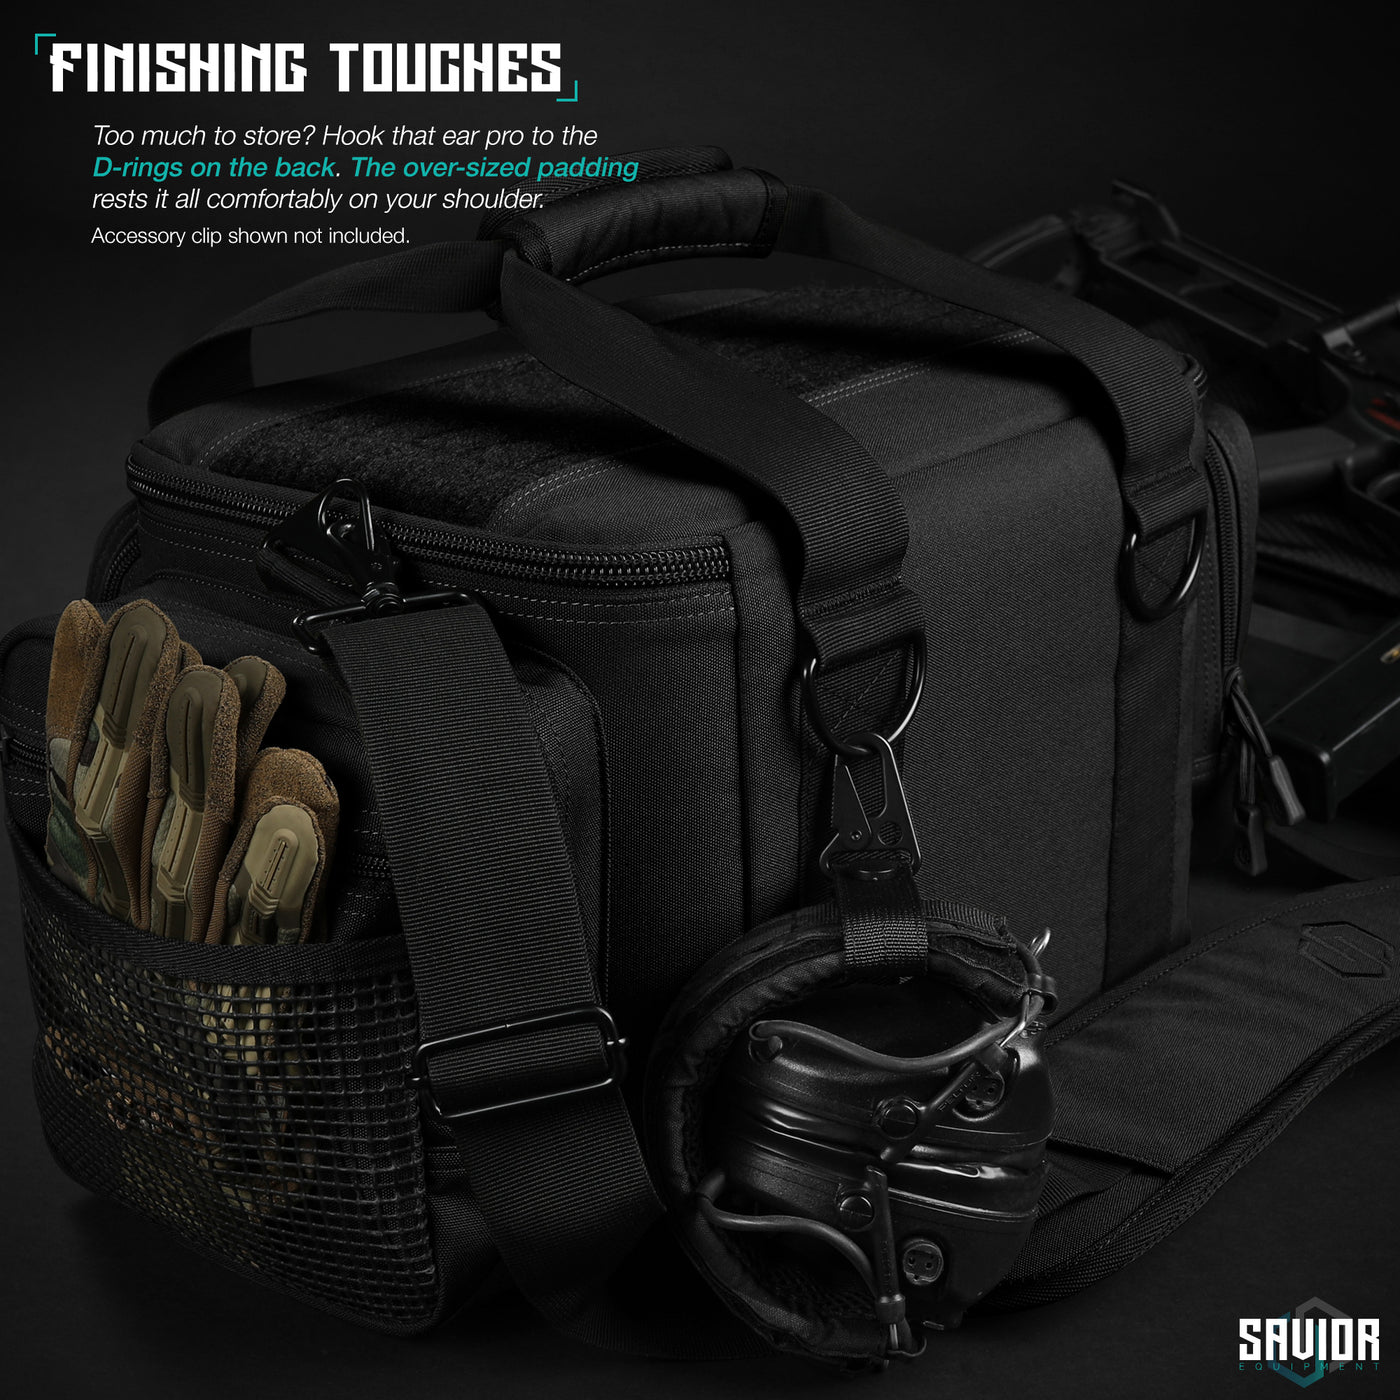 Best Range Bag? Check out the Loadout from Elite Survival Systems – SHWAT™